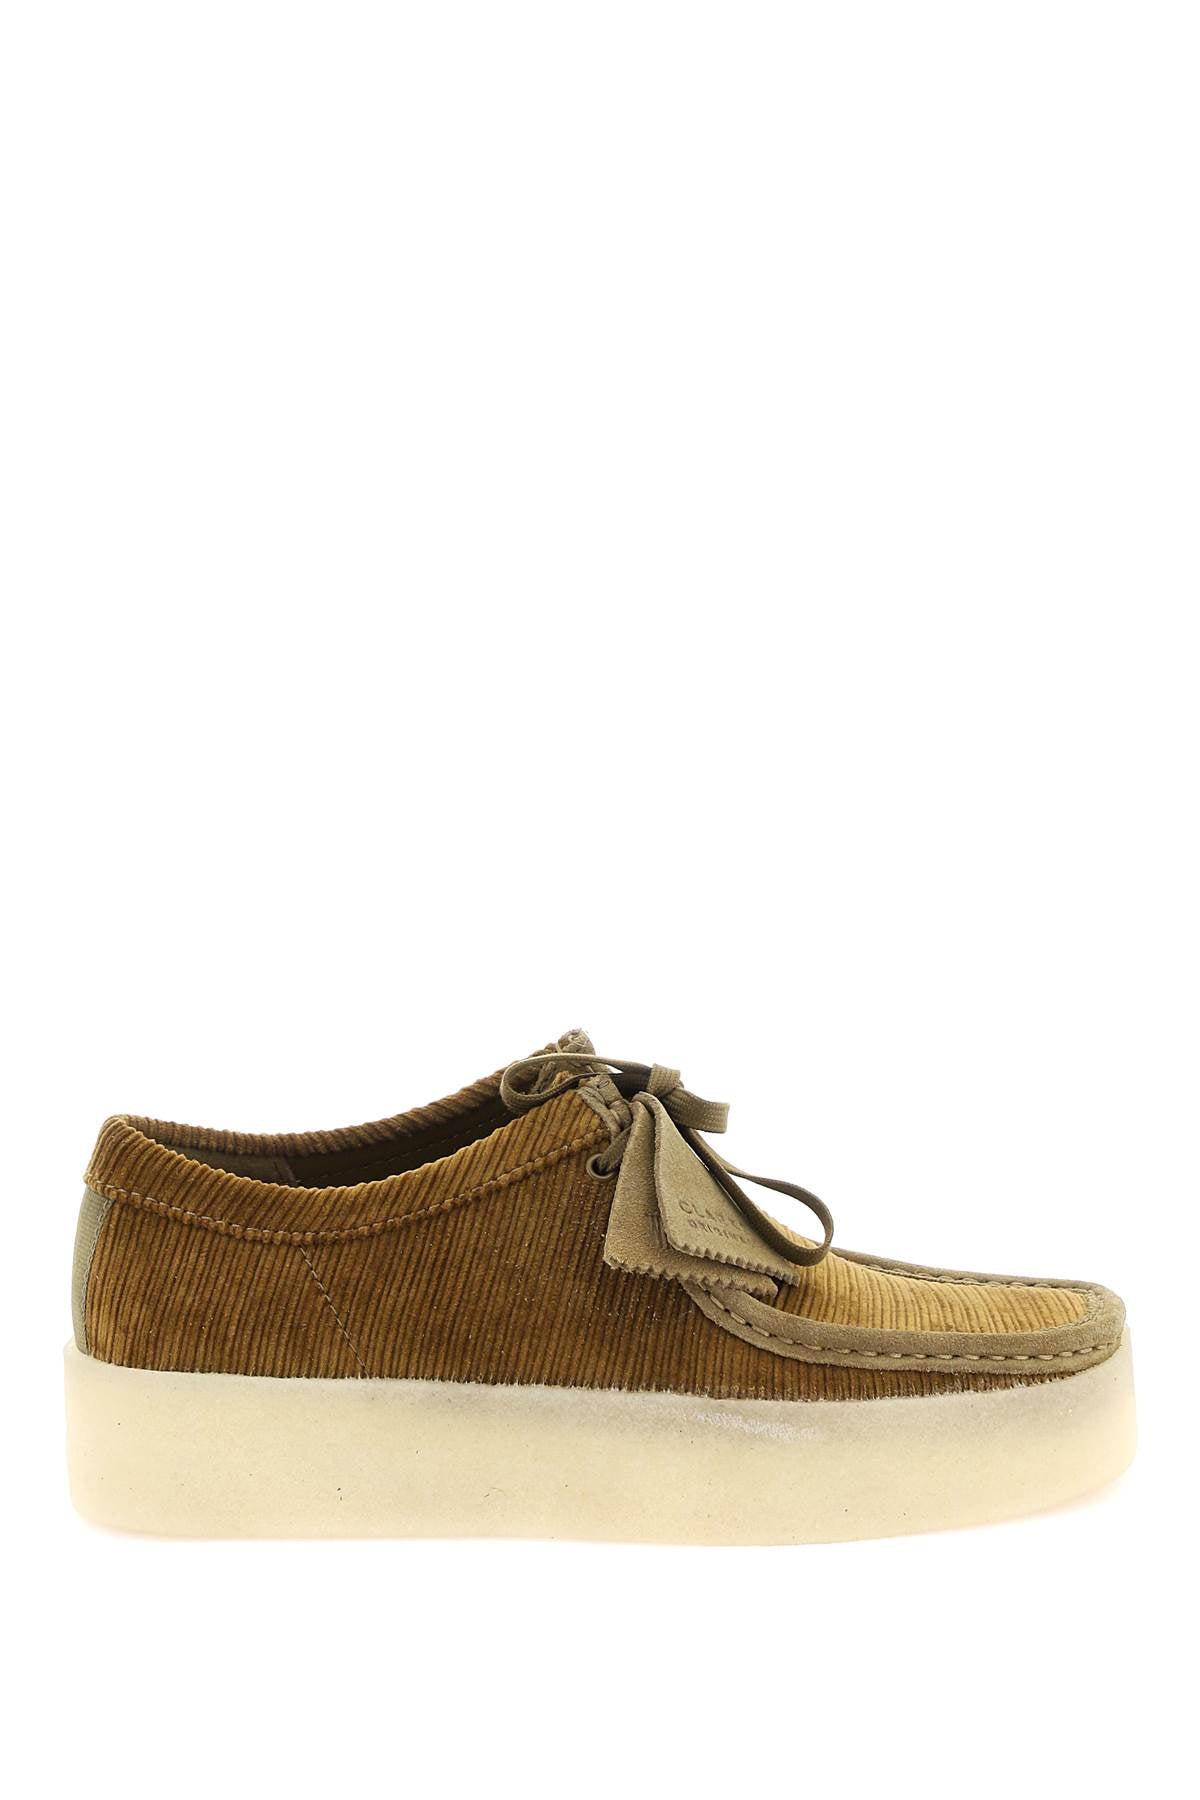 Clarks originals wallabee cup lace-up shoes-0